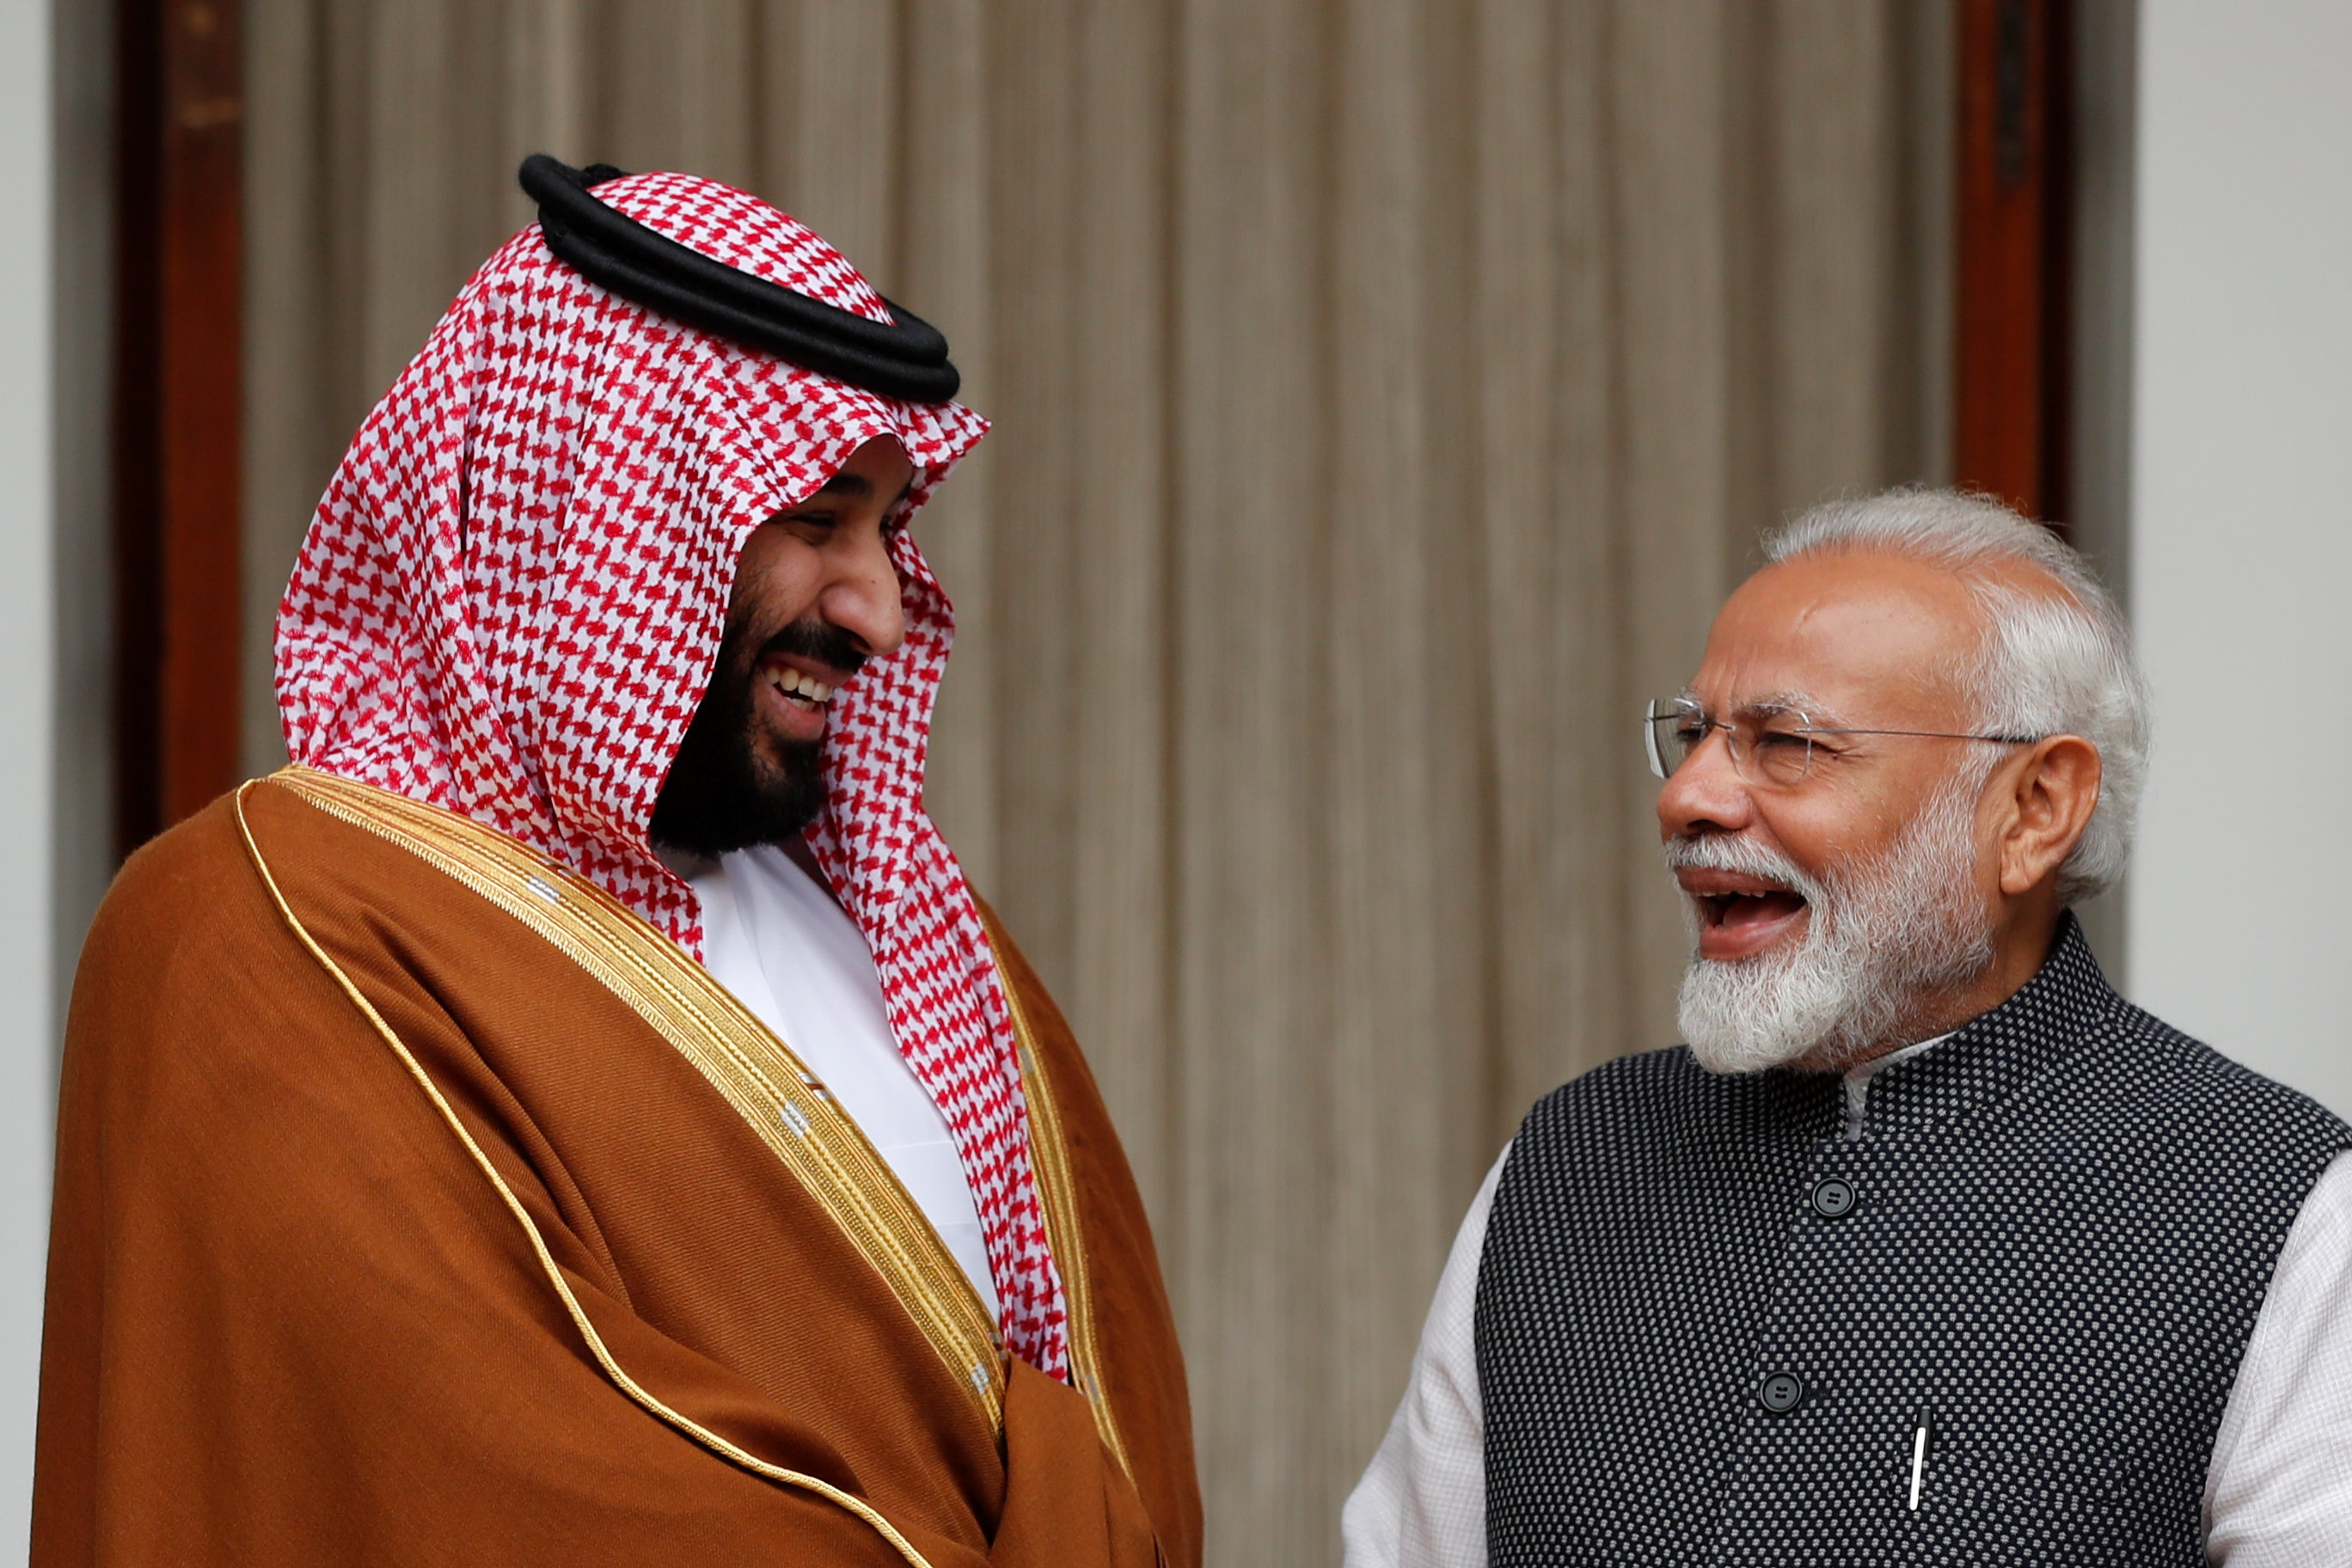 Saudi Arabia's Crown Prince Mohammed bin Salman and India's Prime Minister Narendra Modi react ahead of their meeting at Hyderabad House in New Delhi